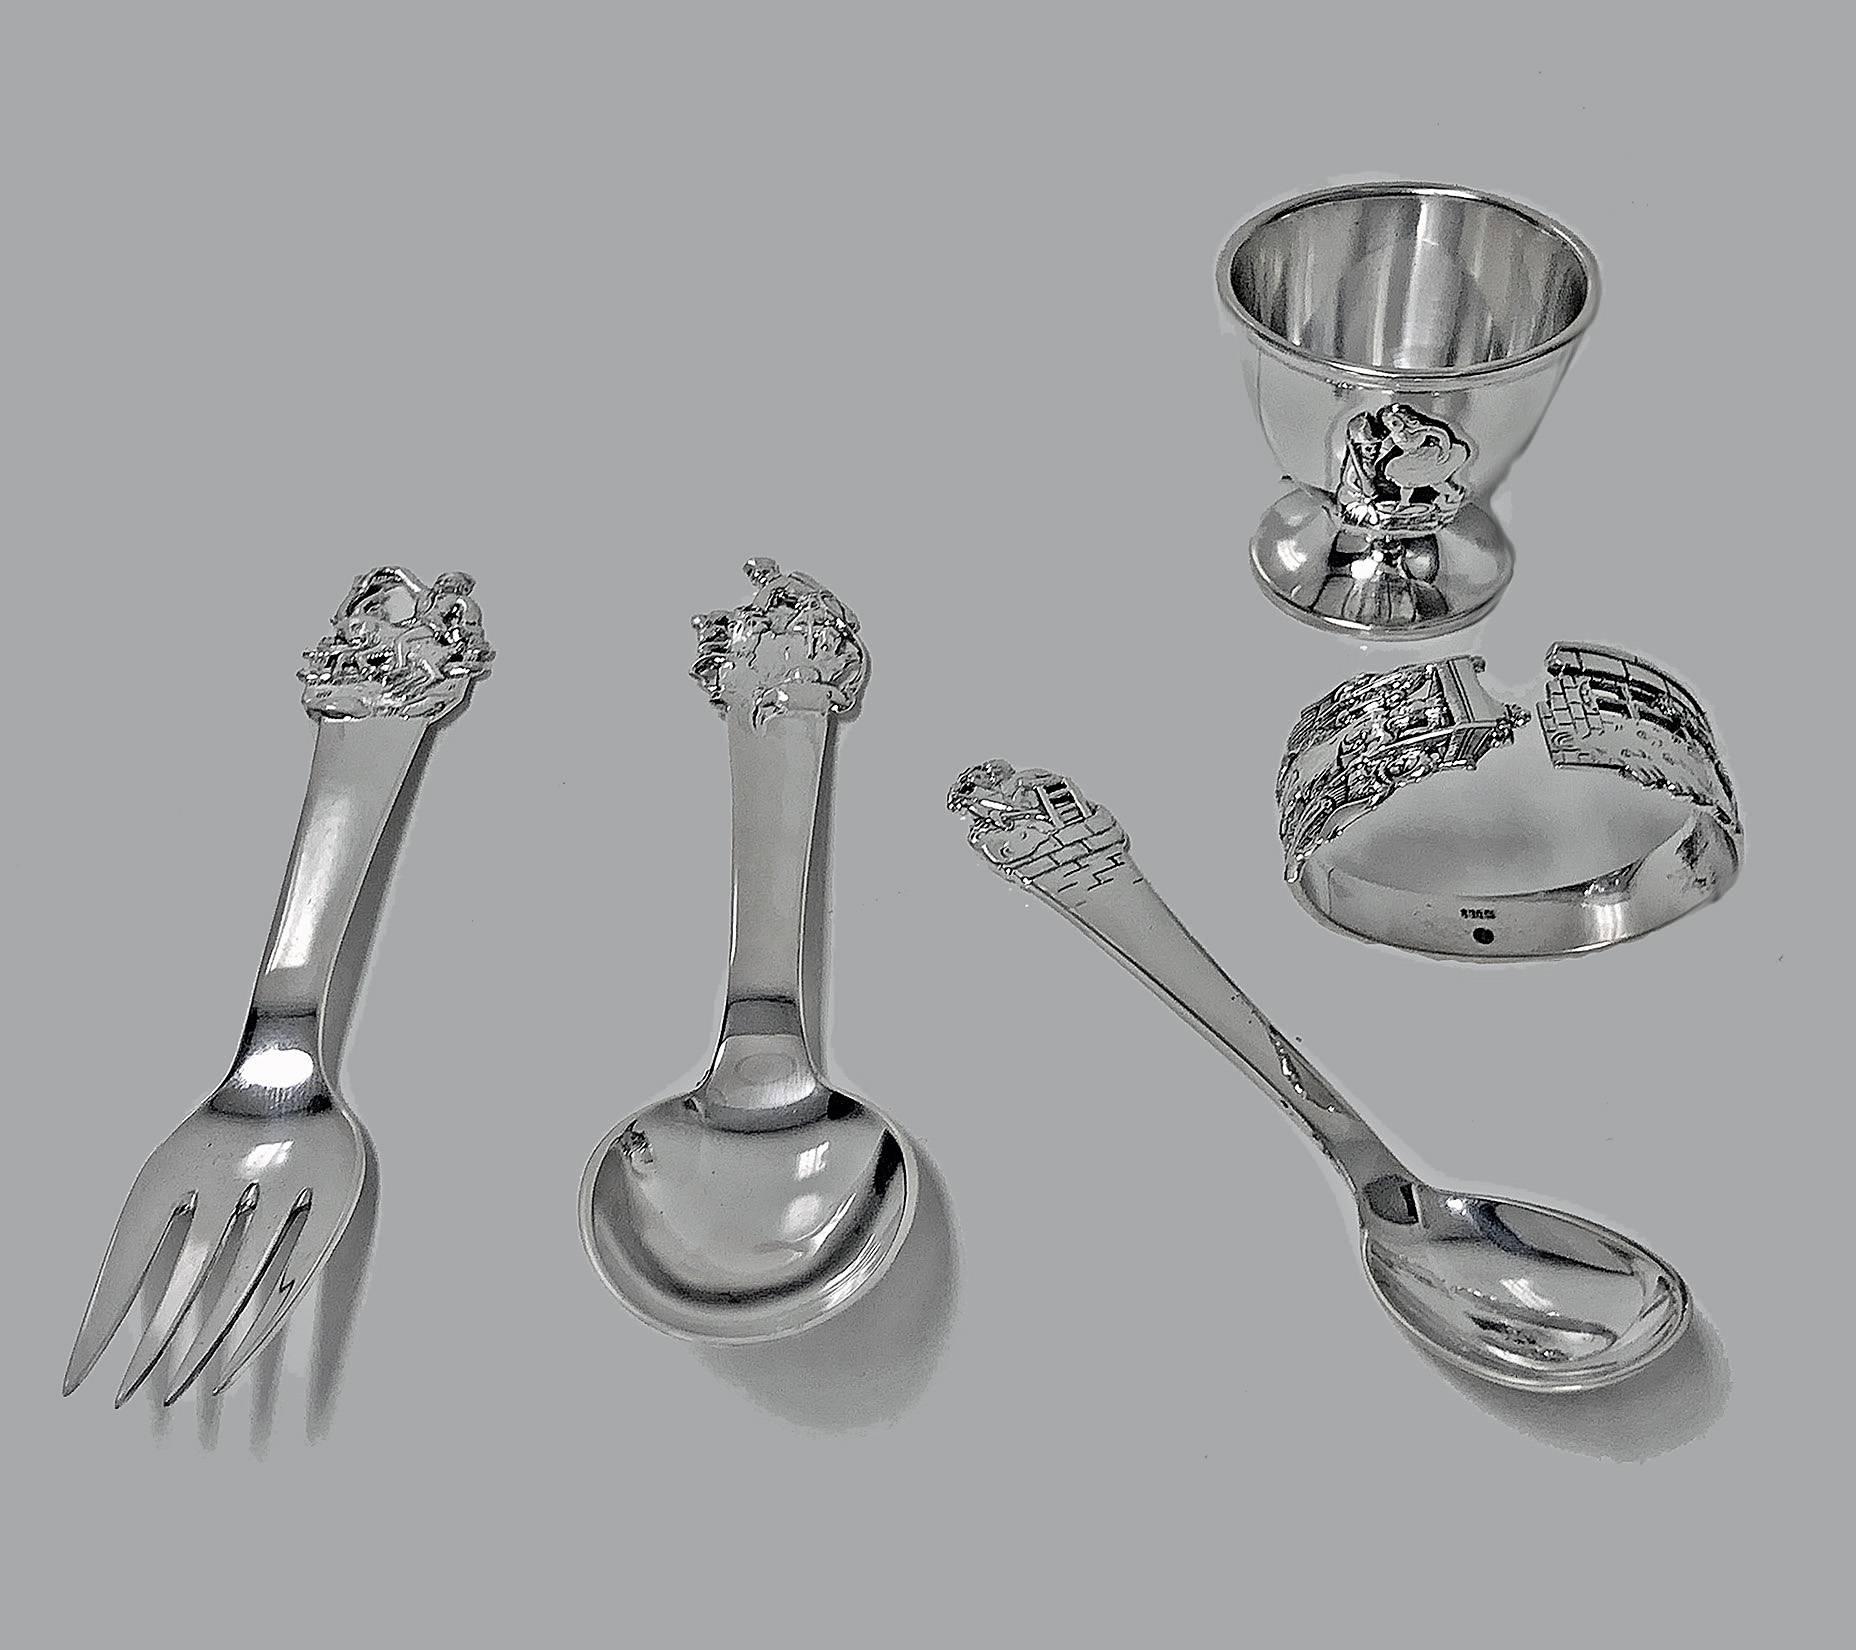 Rare Danish Silver Horsens 'H.C. Andersen' fairy tale child's set, circa 1955. The set comprising fork, spoon, egg spoon, egg cup and serviette ring. All depicting various H.C. Andersen fairy tale scenes. Lengths of spoon and fork: 5.75 inches.